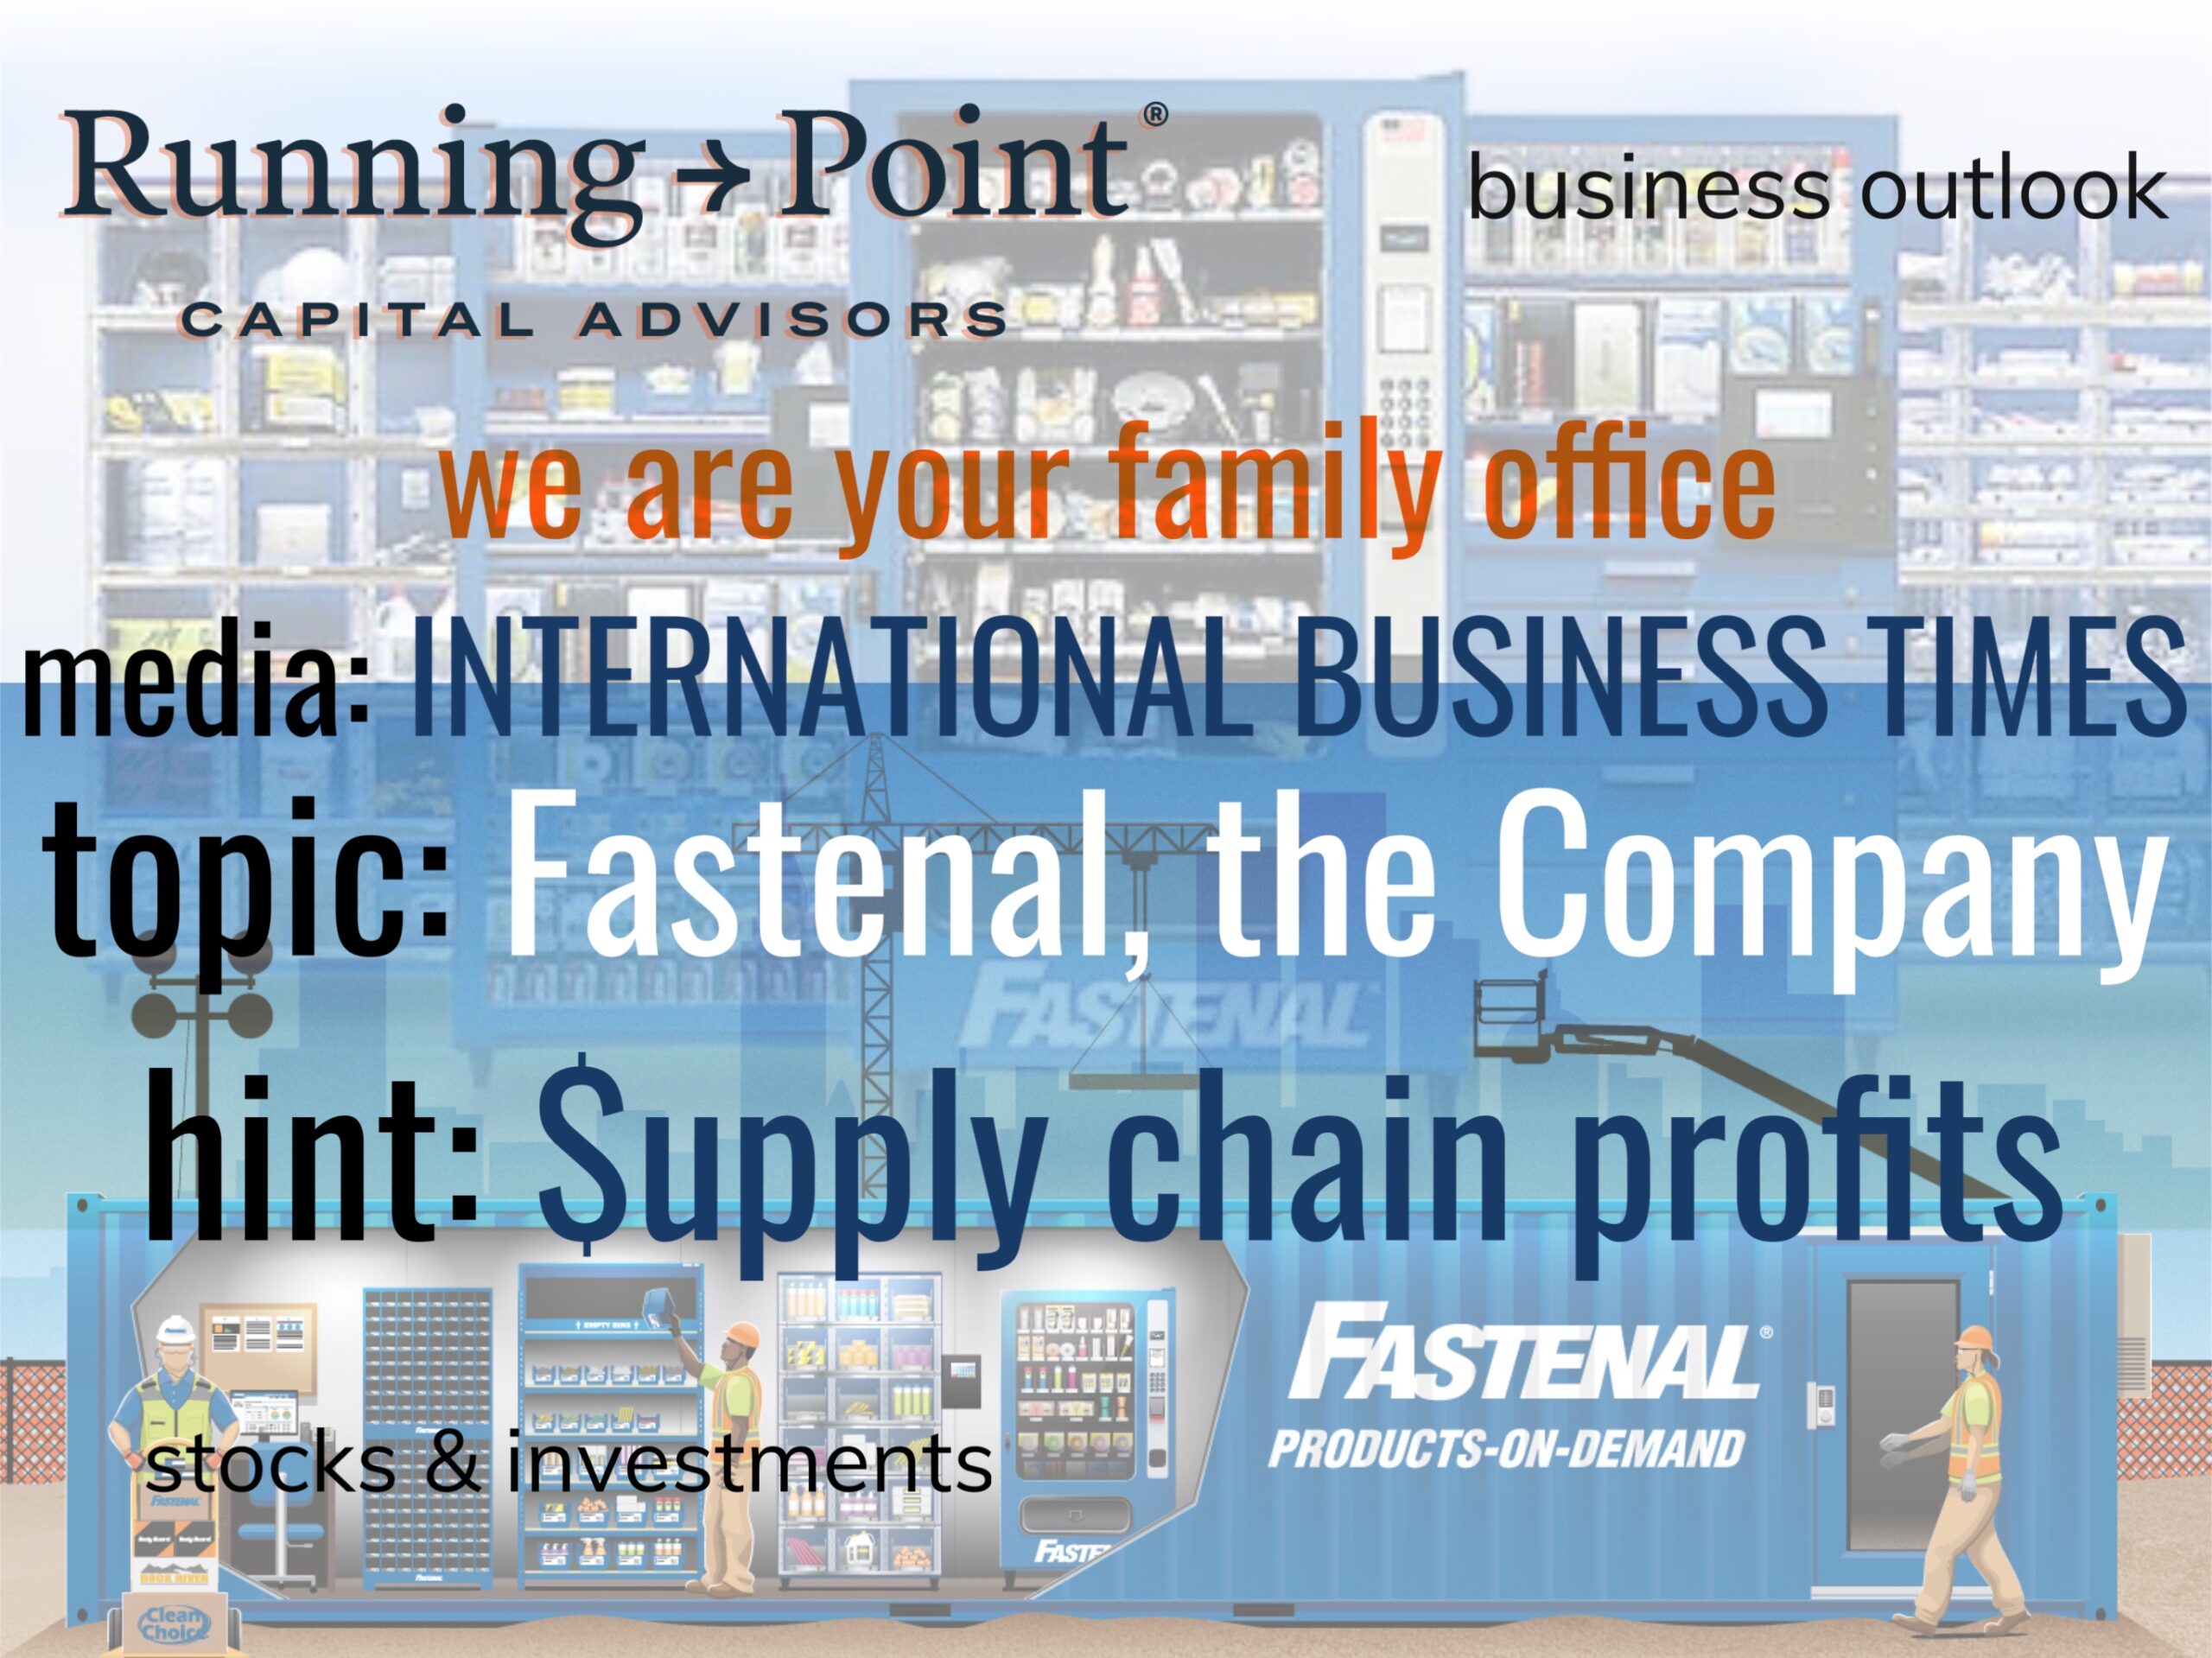 Fastenal, slow and steady